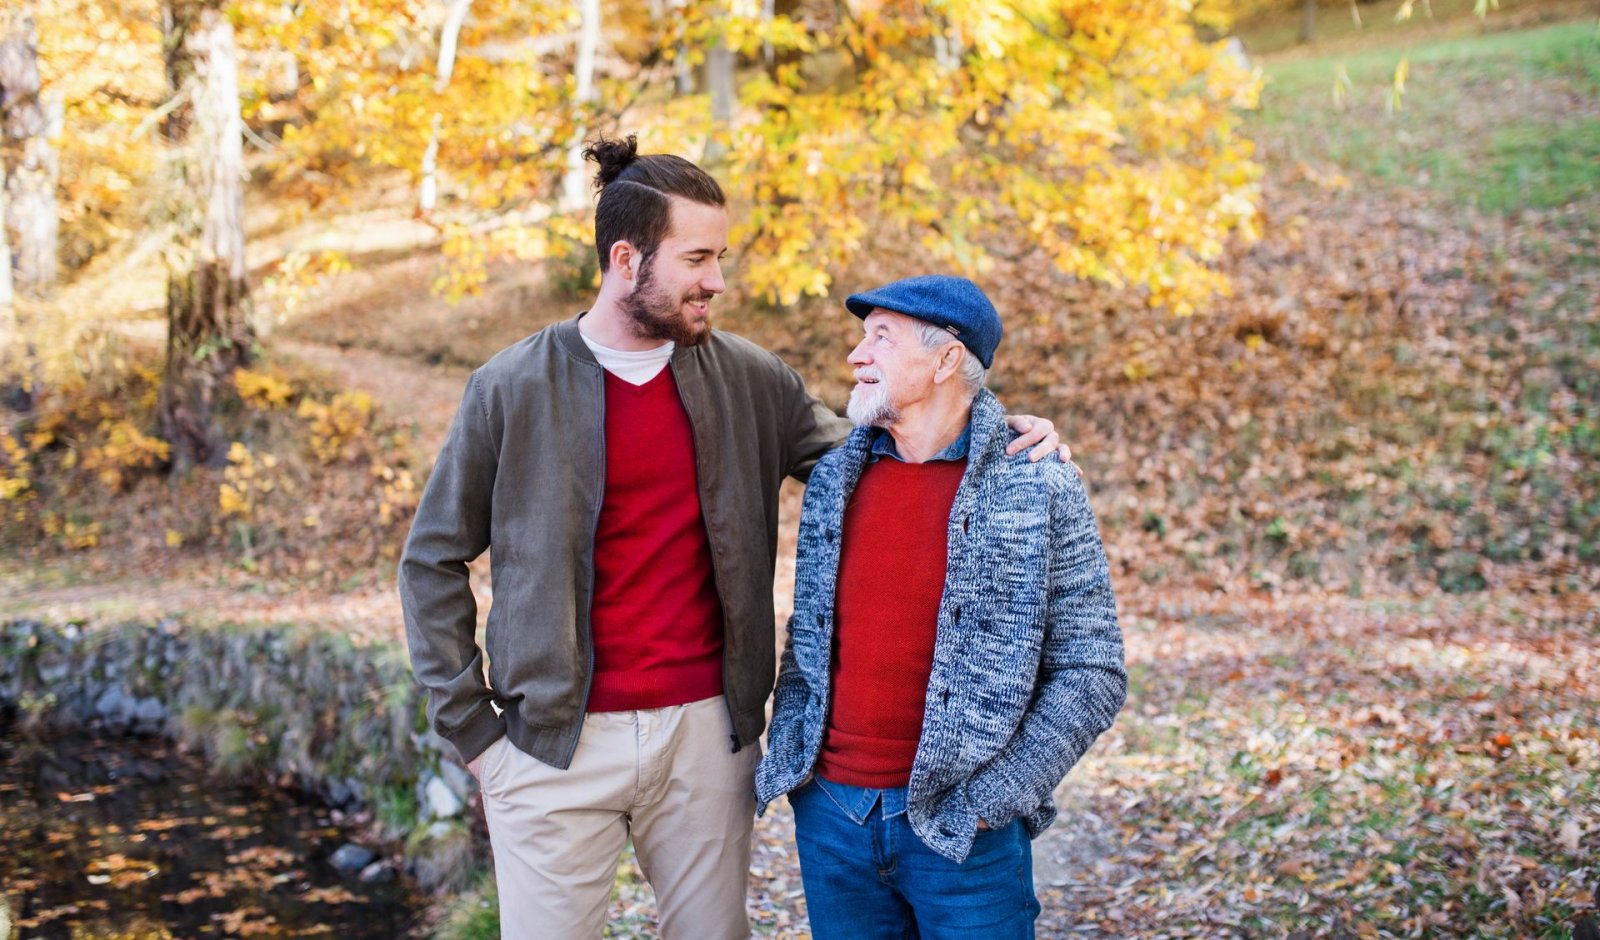 A senior man and his son go for a walk on a fall day